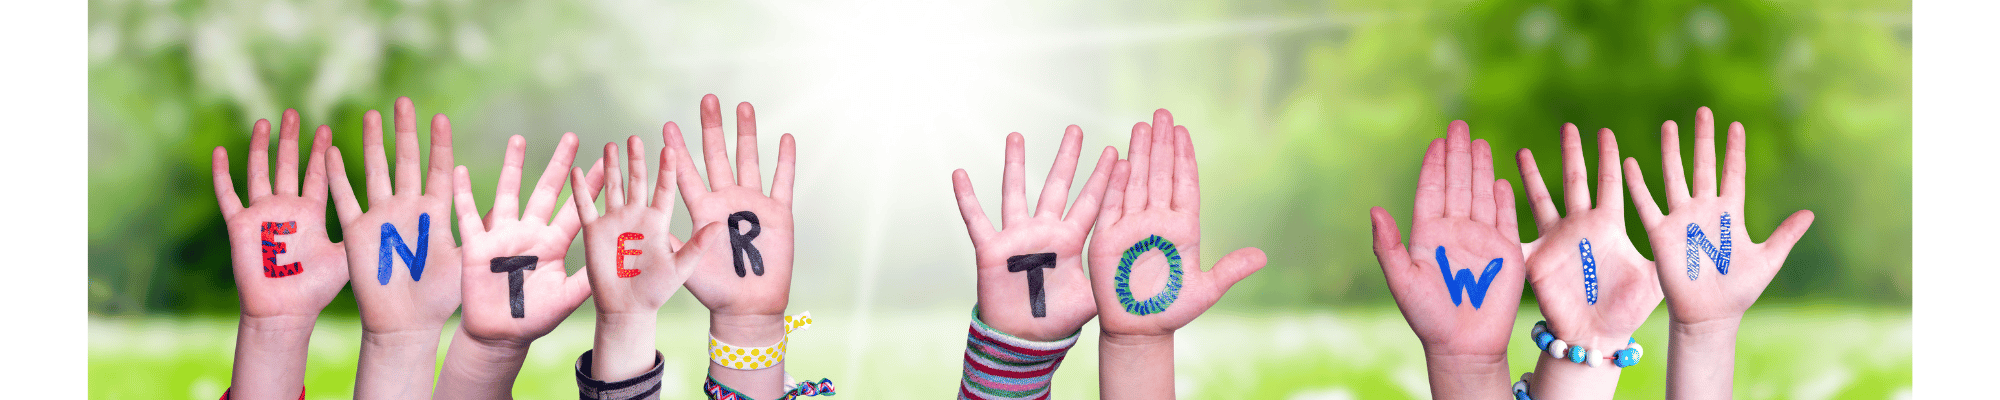 Image of kids hands with Enter to Win painted on their palms